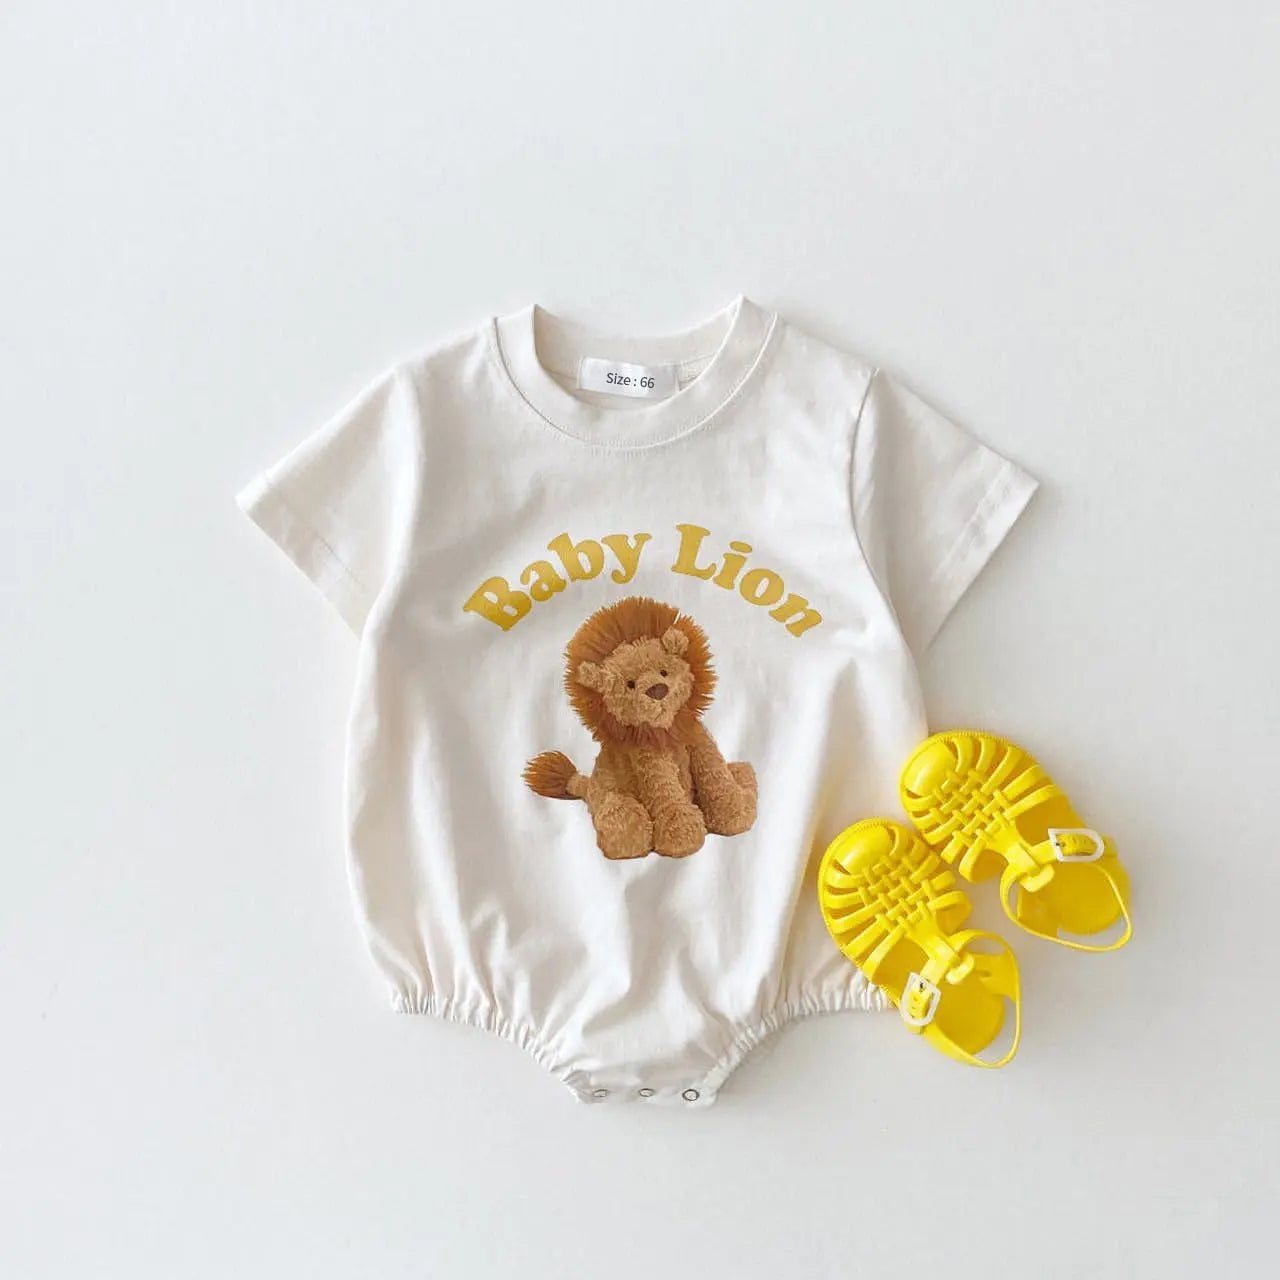 2023 Country Bear Summer Baby Boy Romper Outfit Organic Cotton Bear Print T shirts Romper 3month Infant Clothing Baby Girl Bodysuit - Image #5